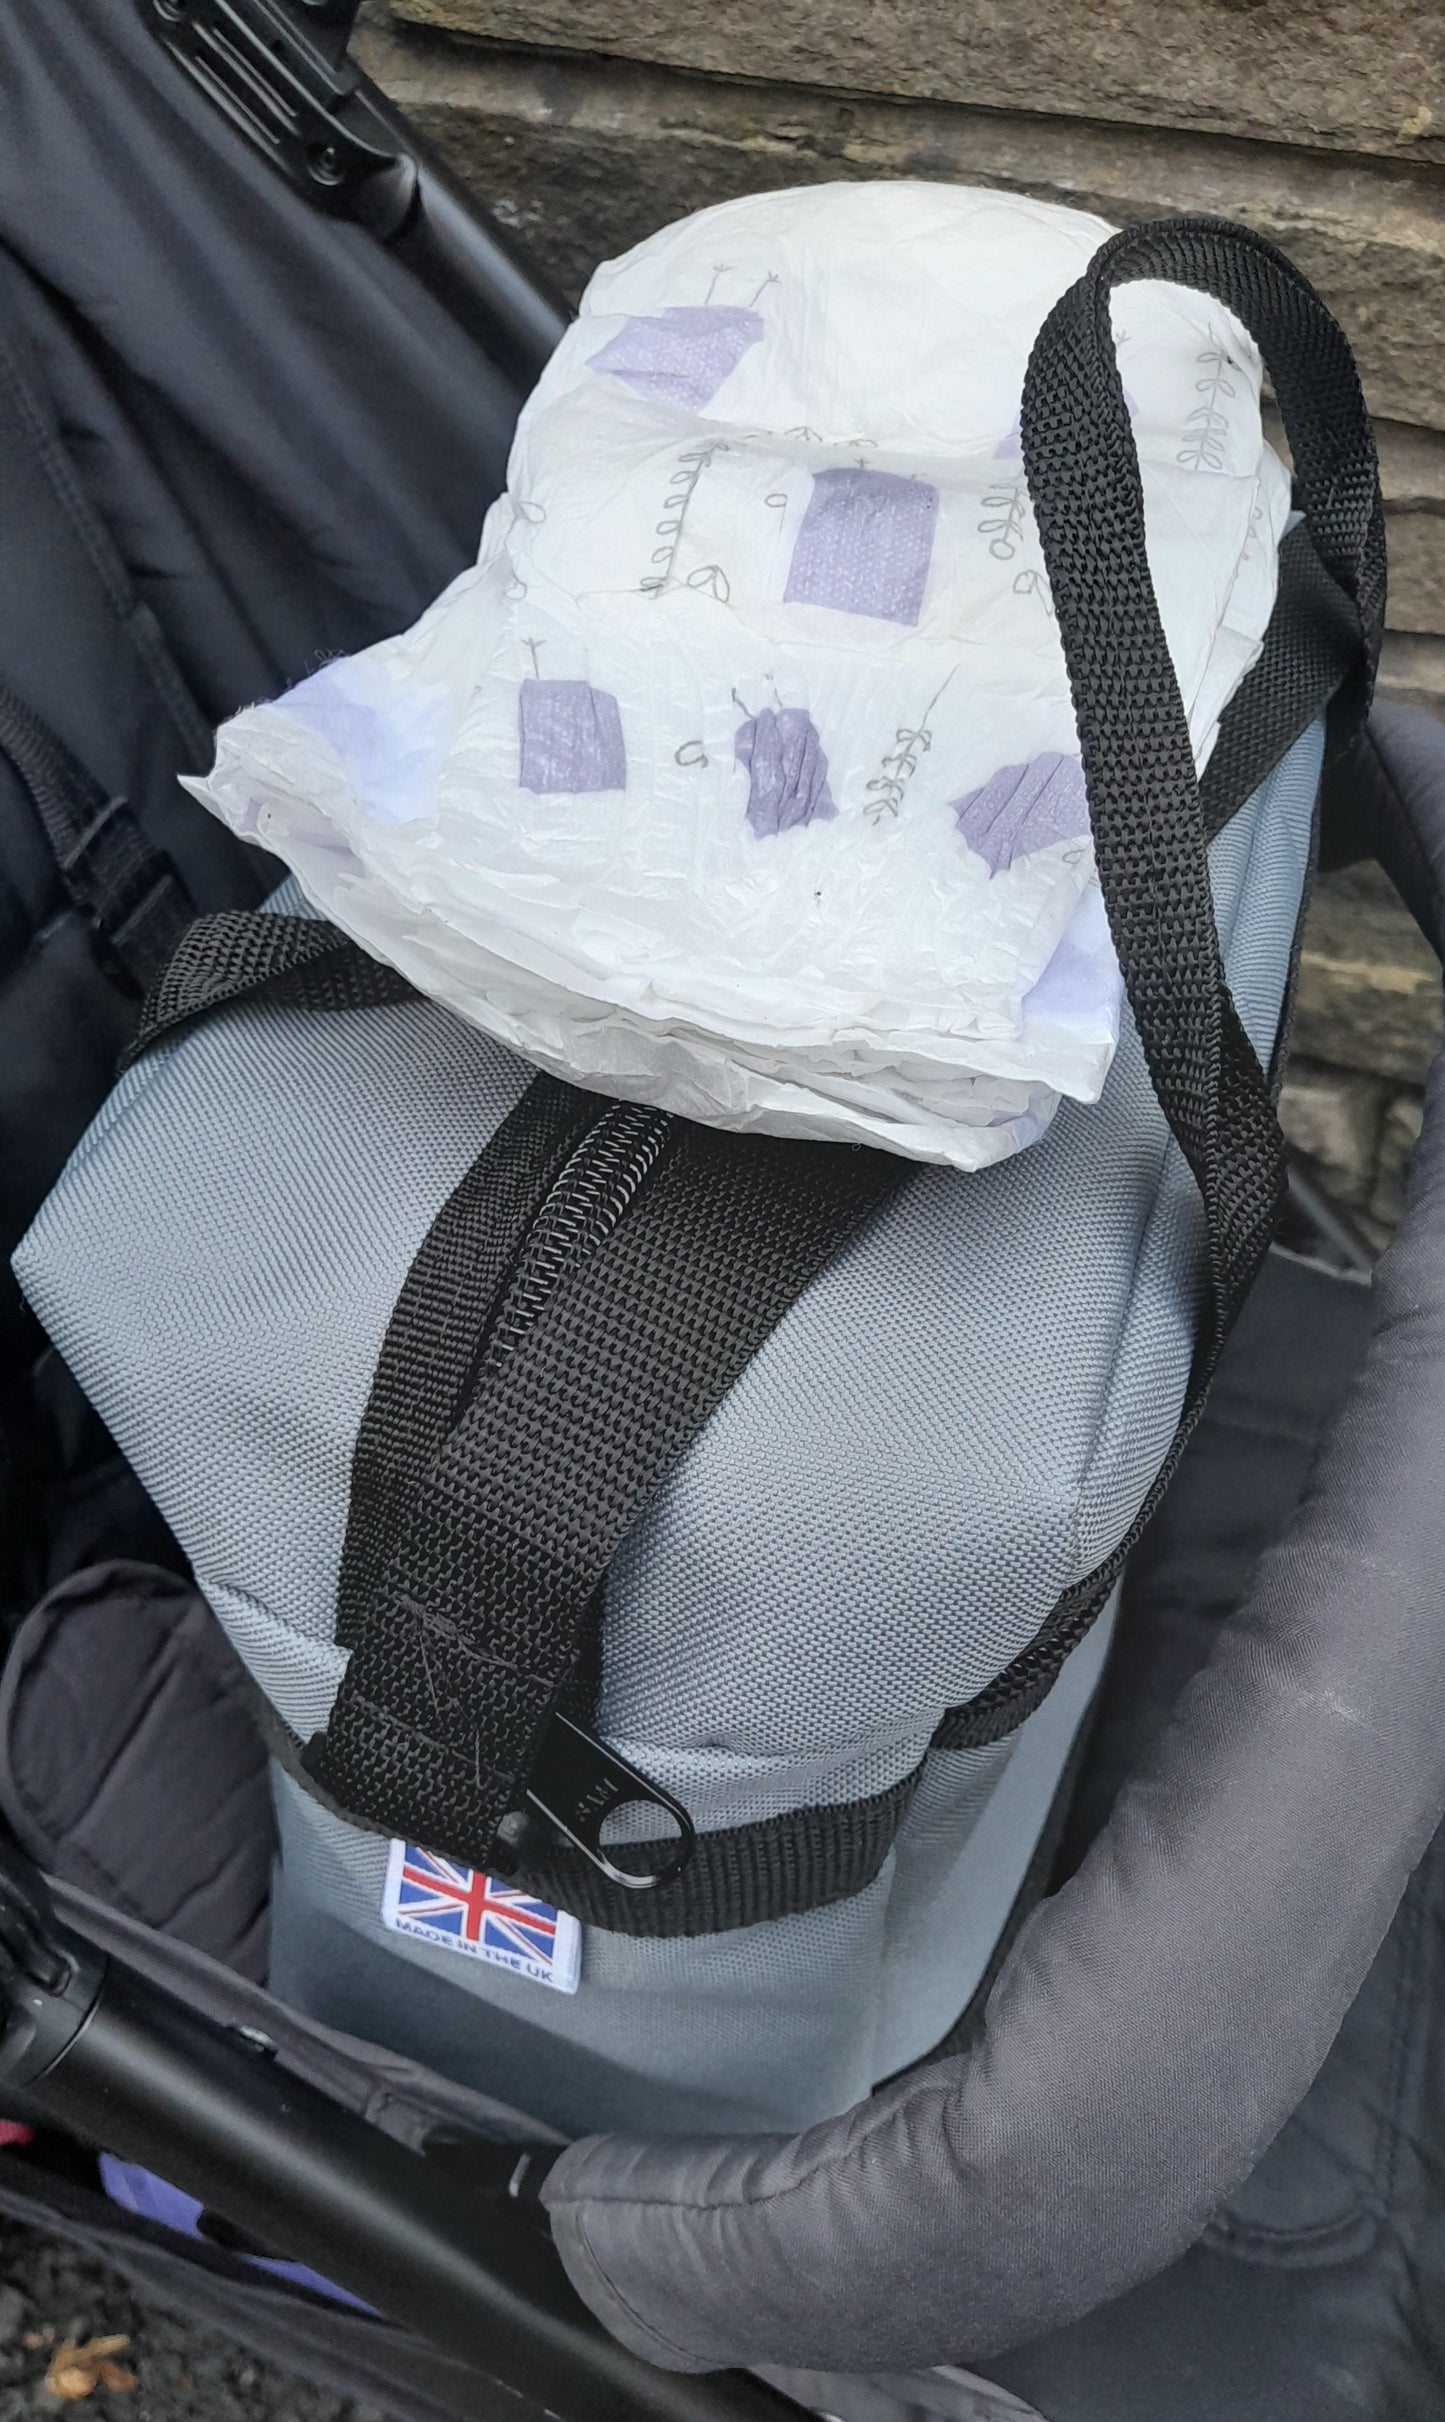 Genesis Nappy Bag.  British made carrier bags for Nappies Diapers or other baby items.